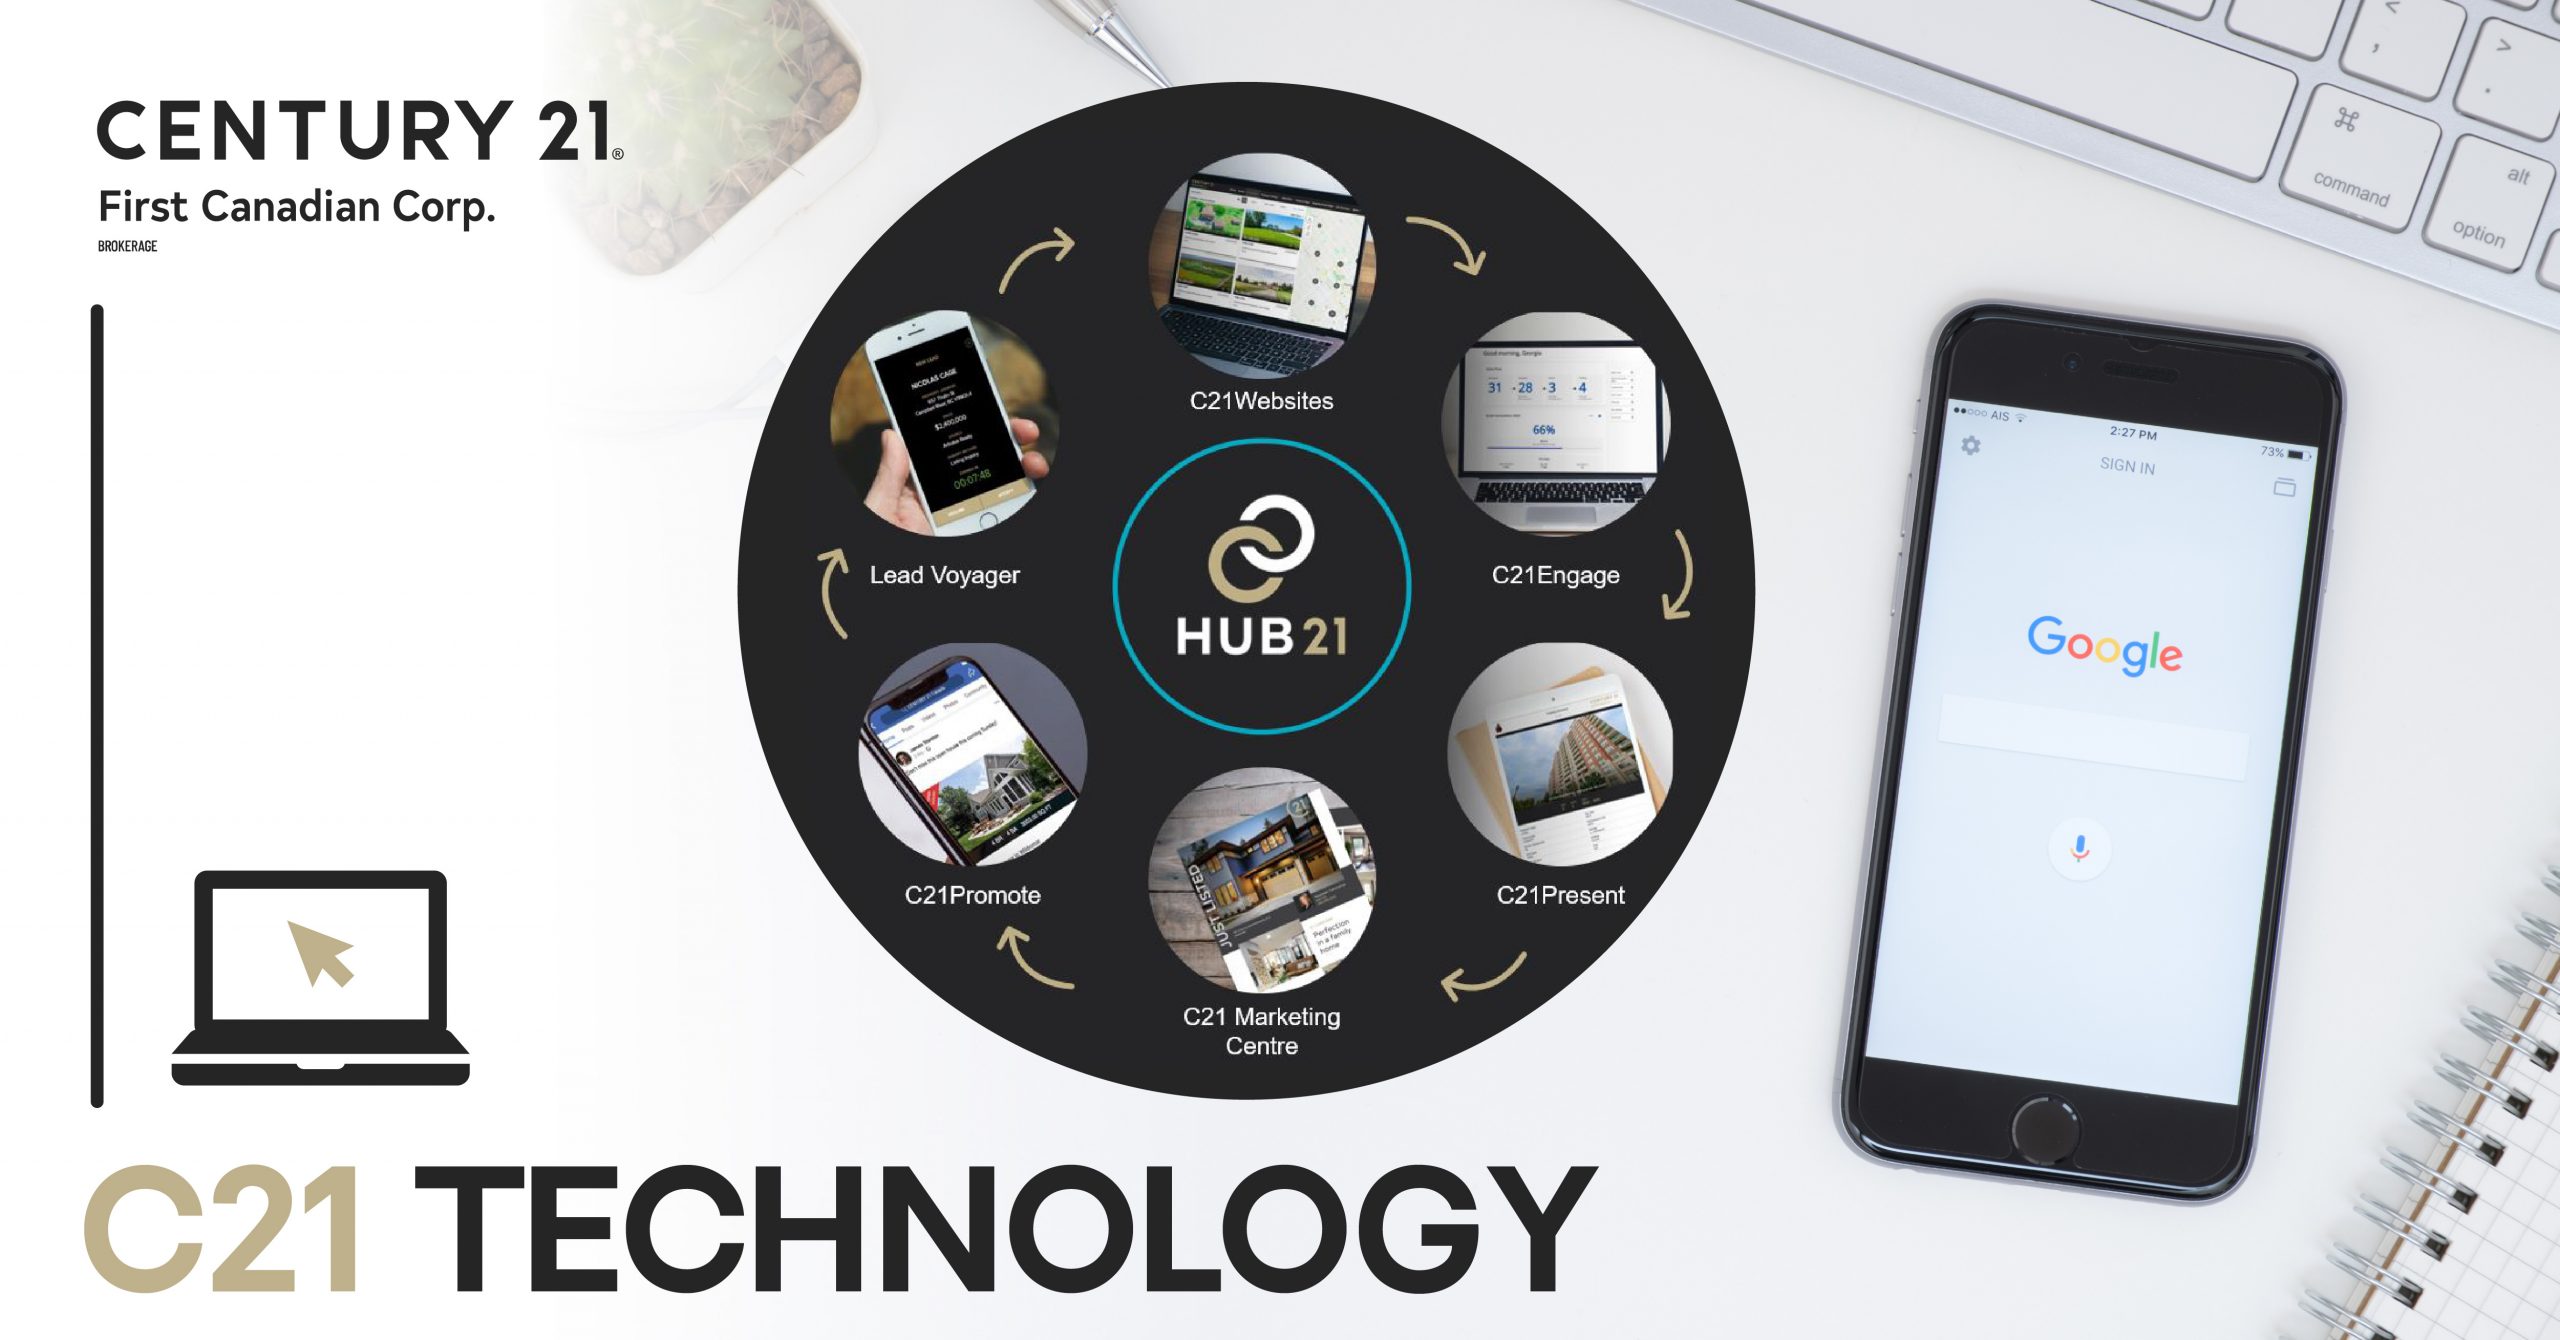 Make the best of your technology with Century 21